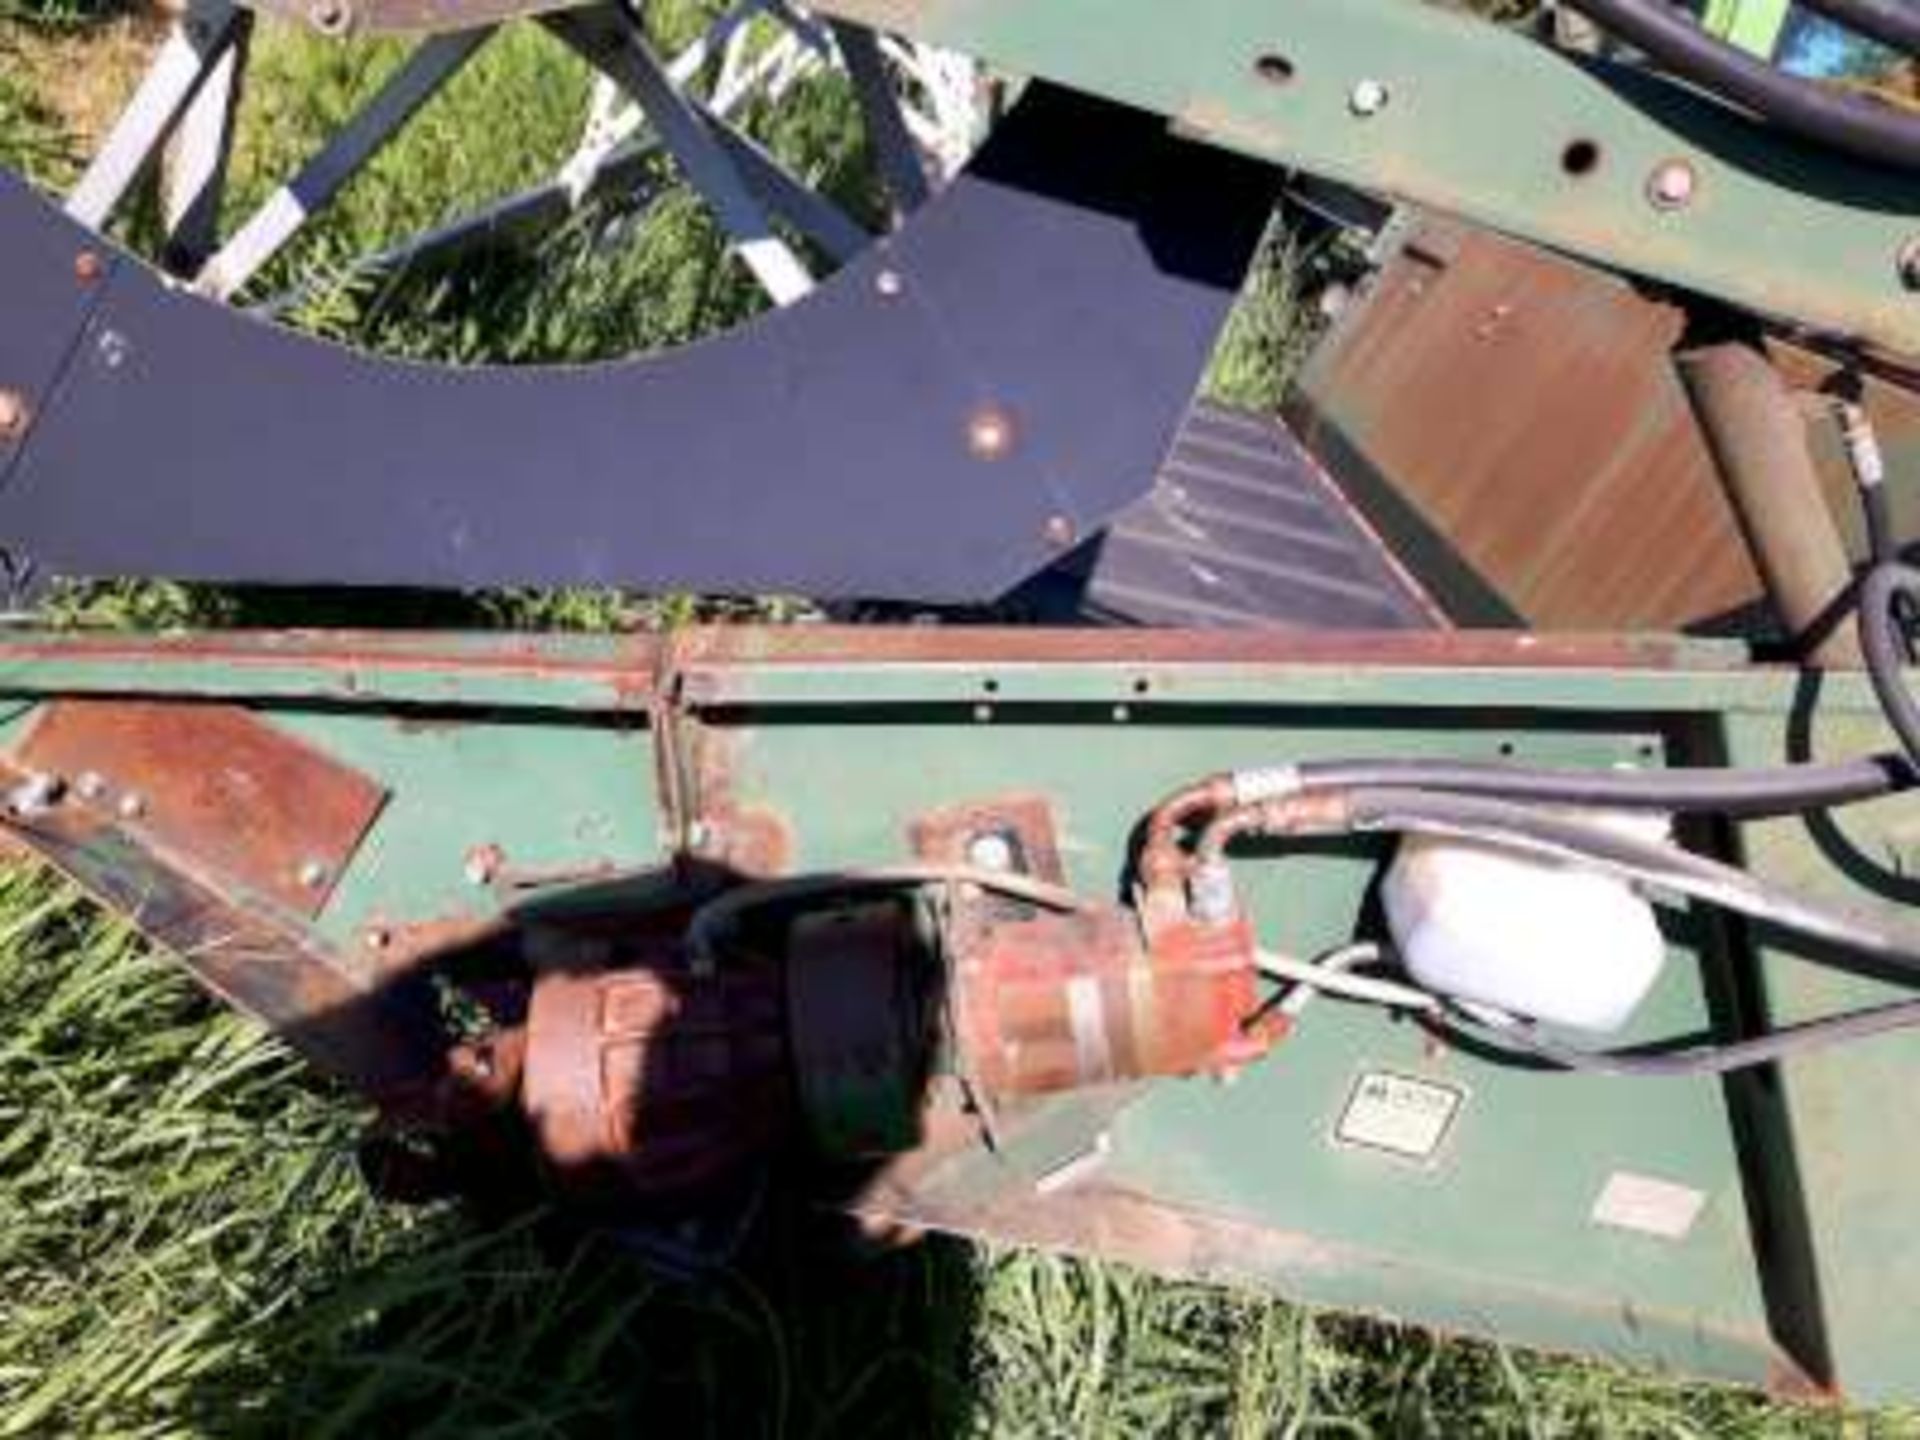 1987 CCIL 722 swather,dsl, PU reels, 26ft - Image 3 of 4